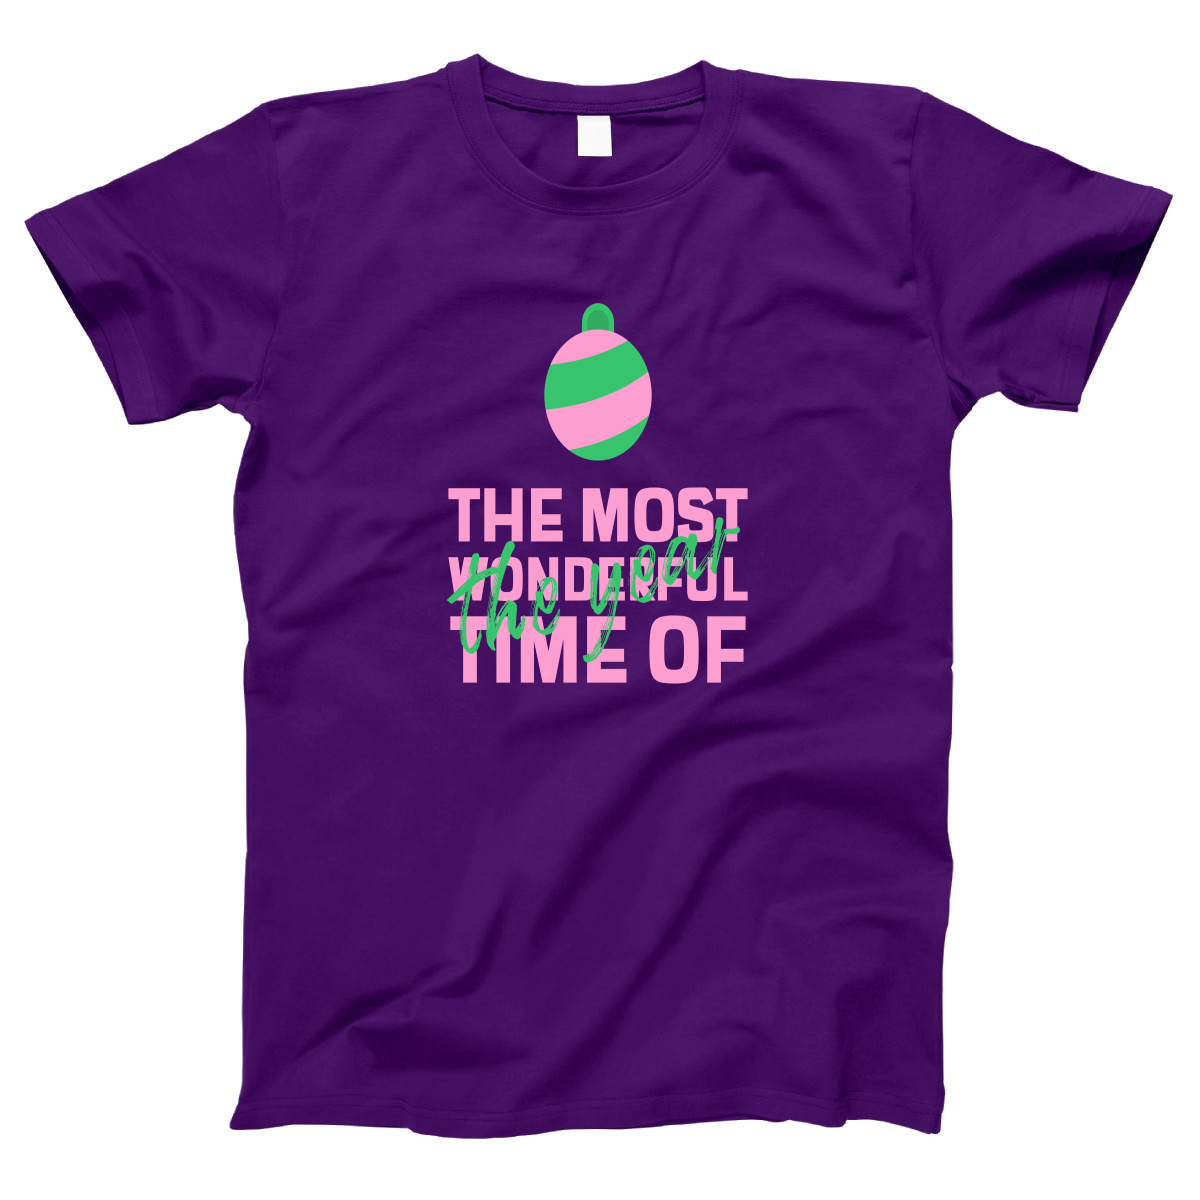 The Most Wonderful Time of the Year Women's T-shirt | Purple